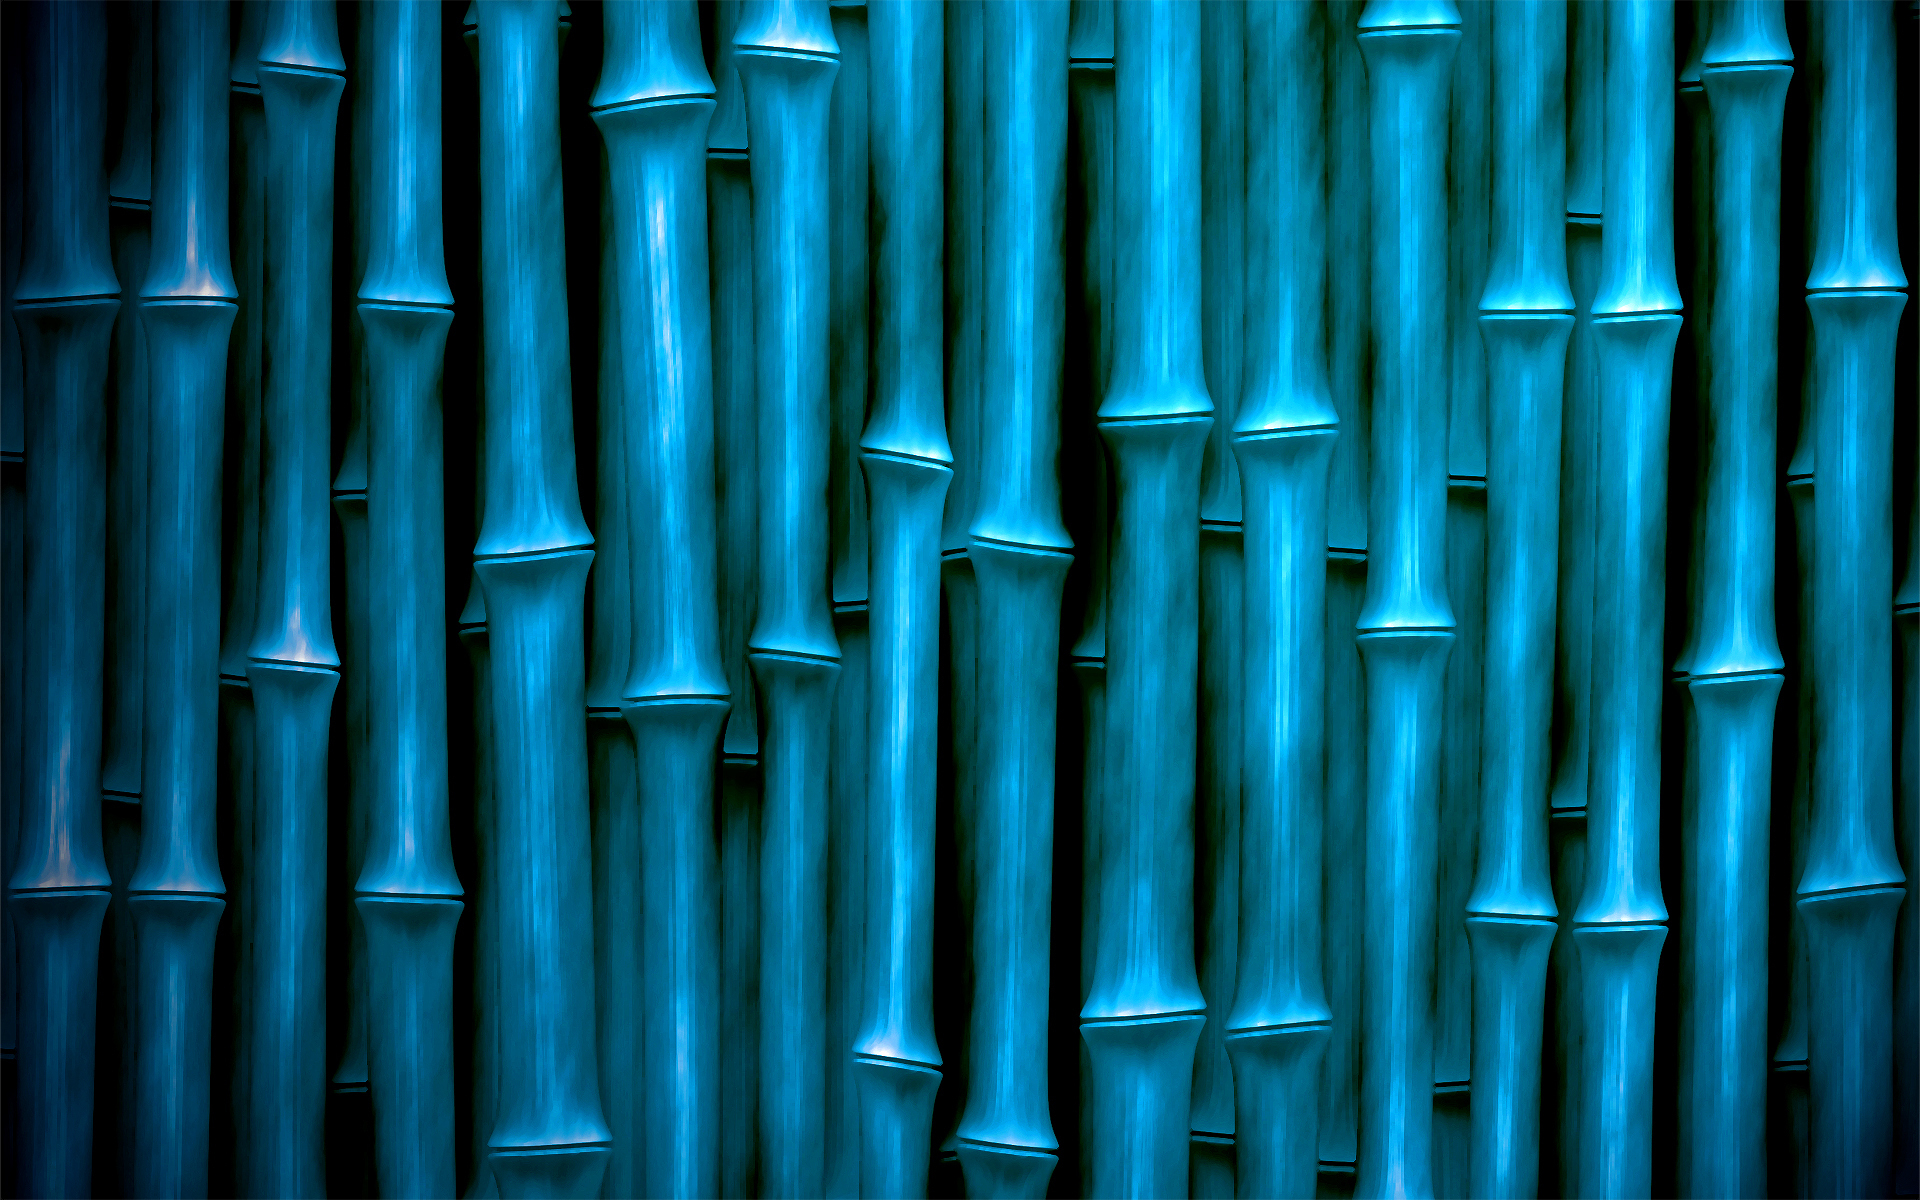 tree wood, bamboo, download photo, texture, background